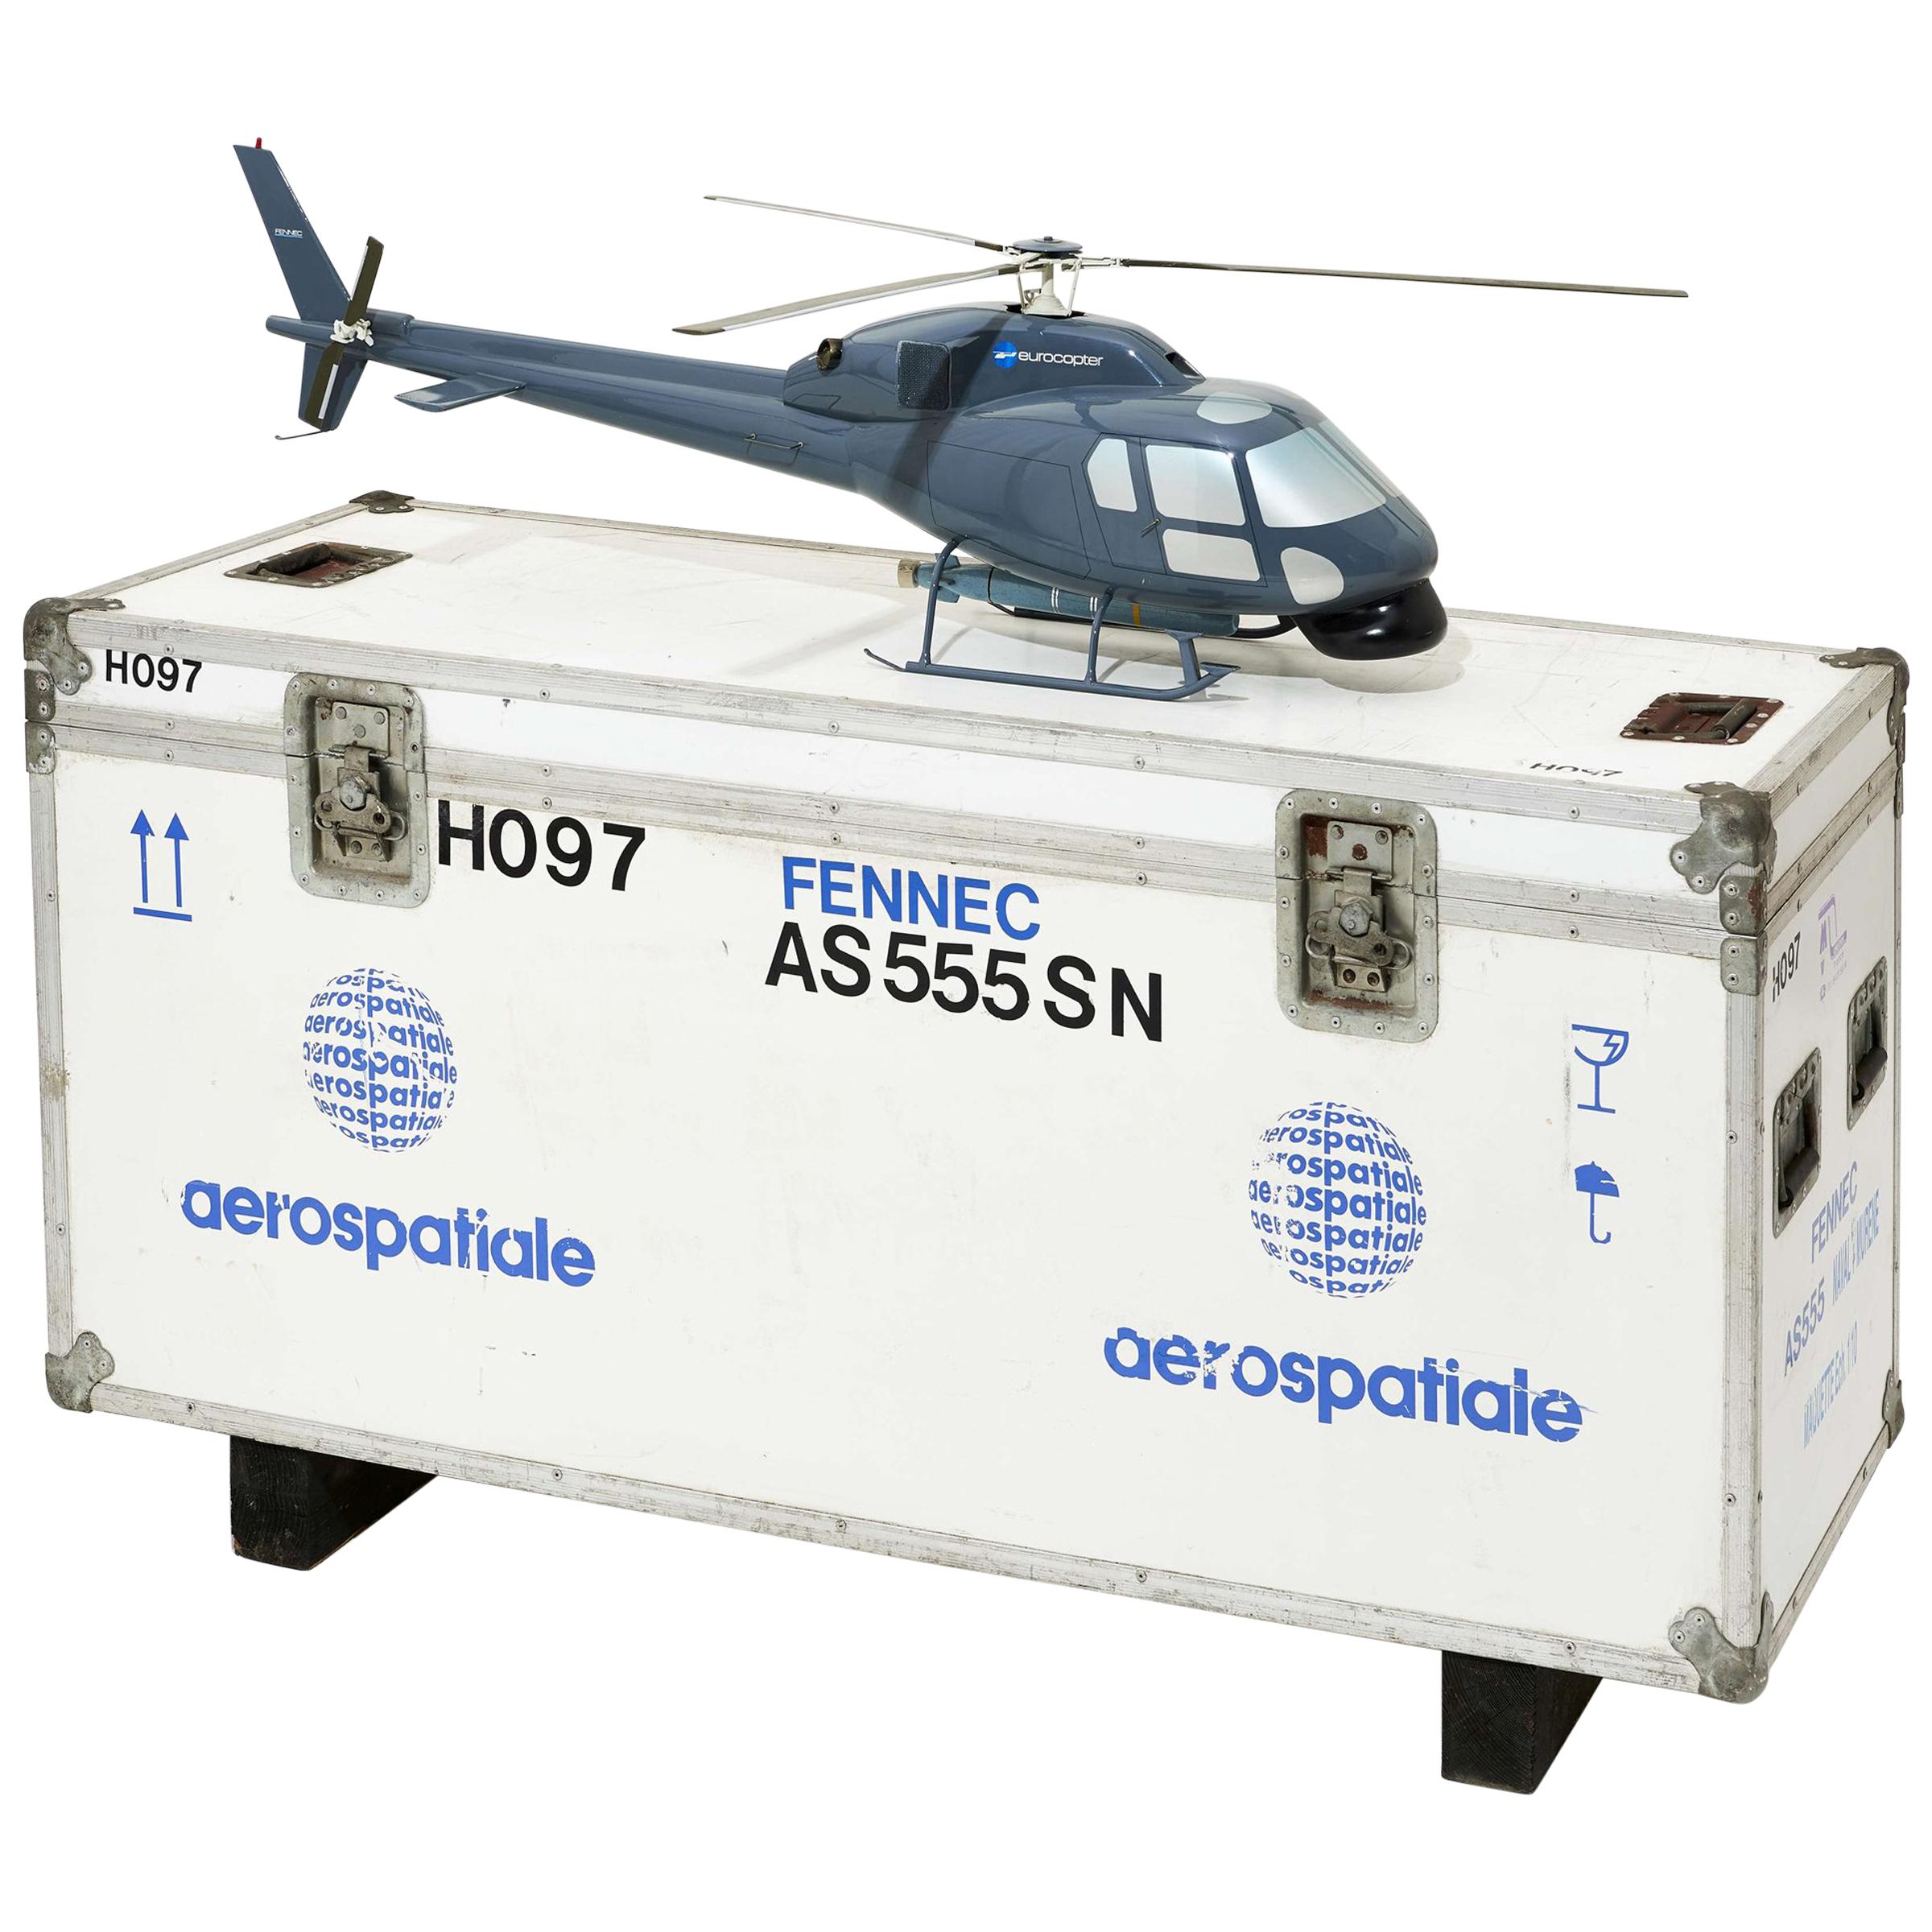 Fennec AS555 Helicopter Model with Transport Box For Sale